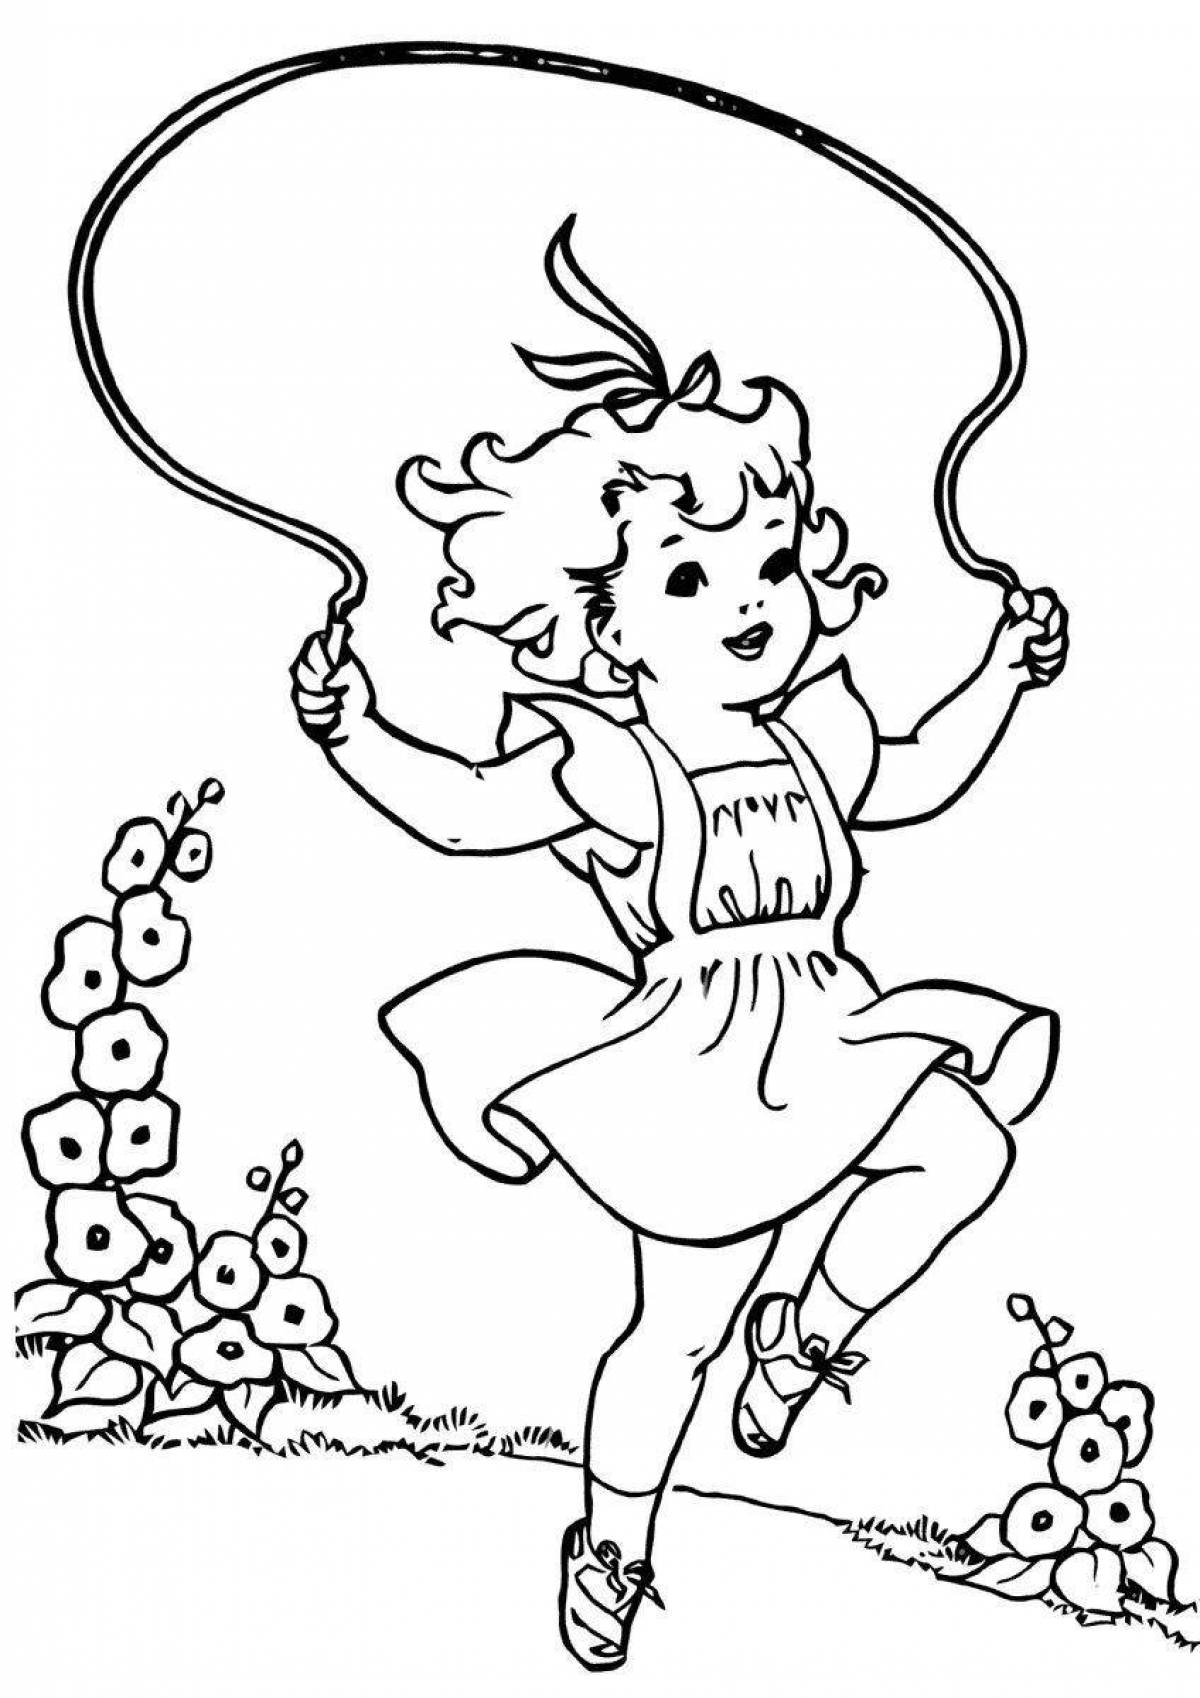 Outgoing jump rope coloring page